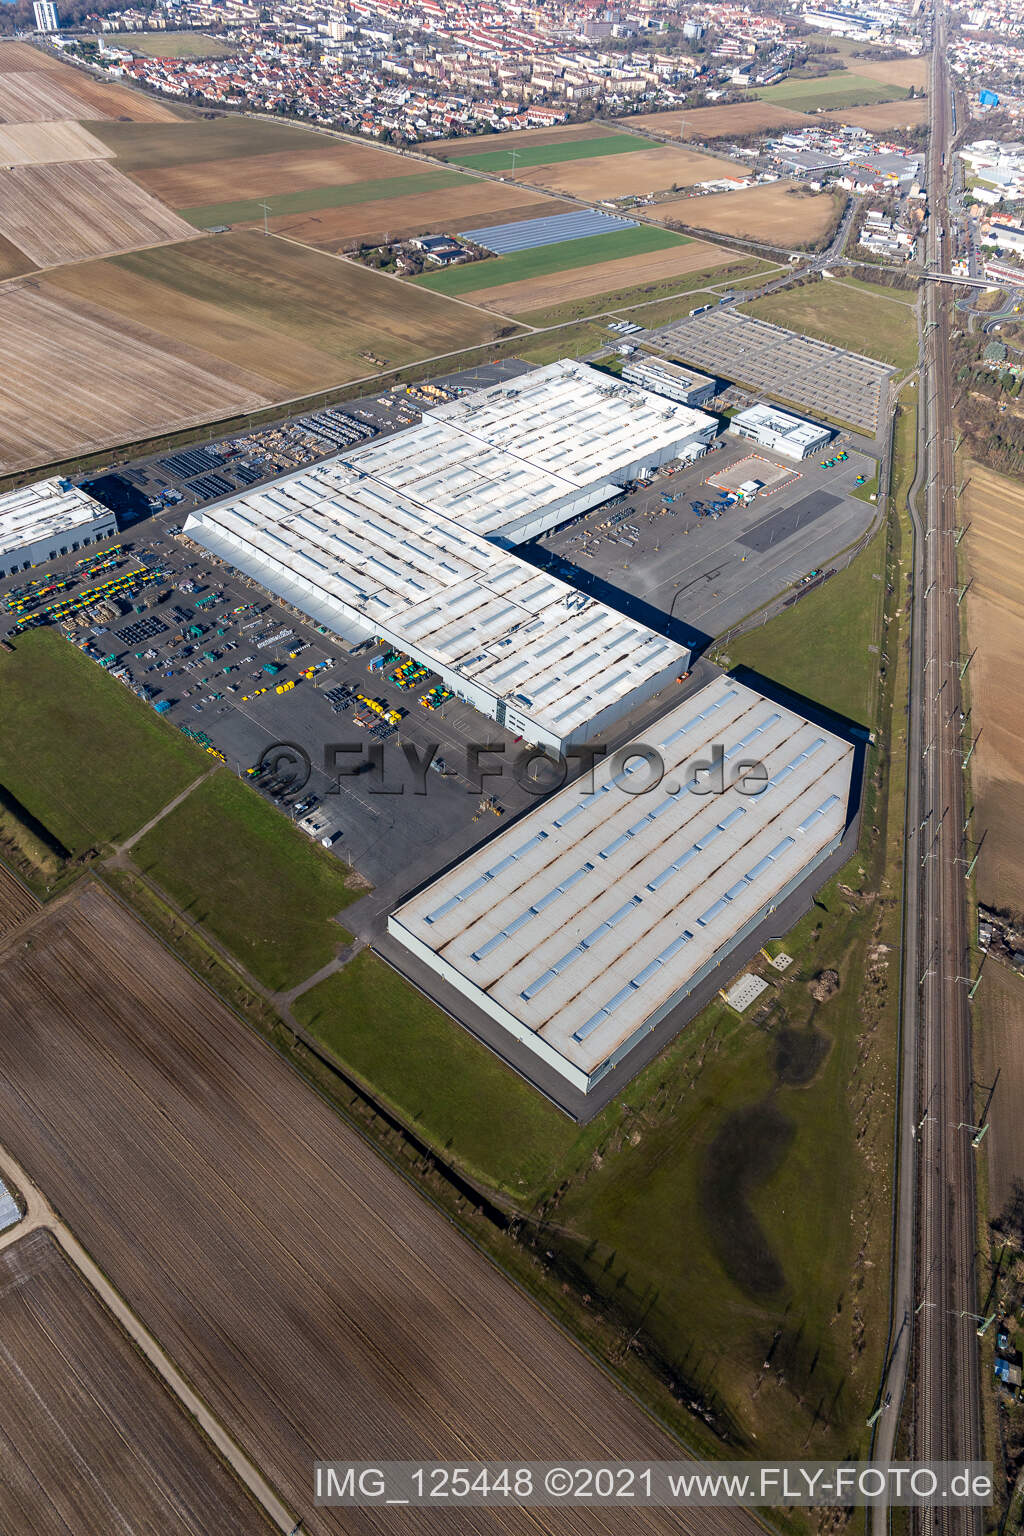 Buildings and production halls on the vehicle construction site of Joseph Voegele AG in the district Rheingoenheim in Ludwigshafen am Rhein in the state Rhineland-Palatinate, Germany seen from above